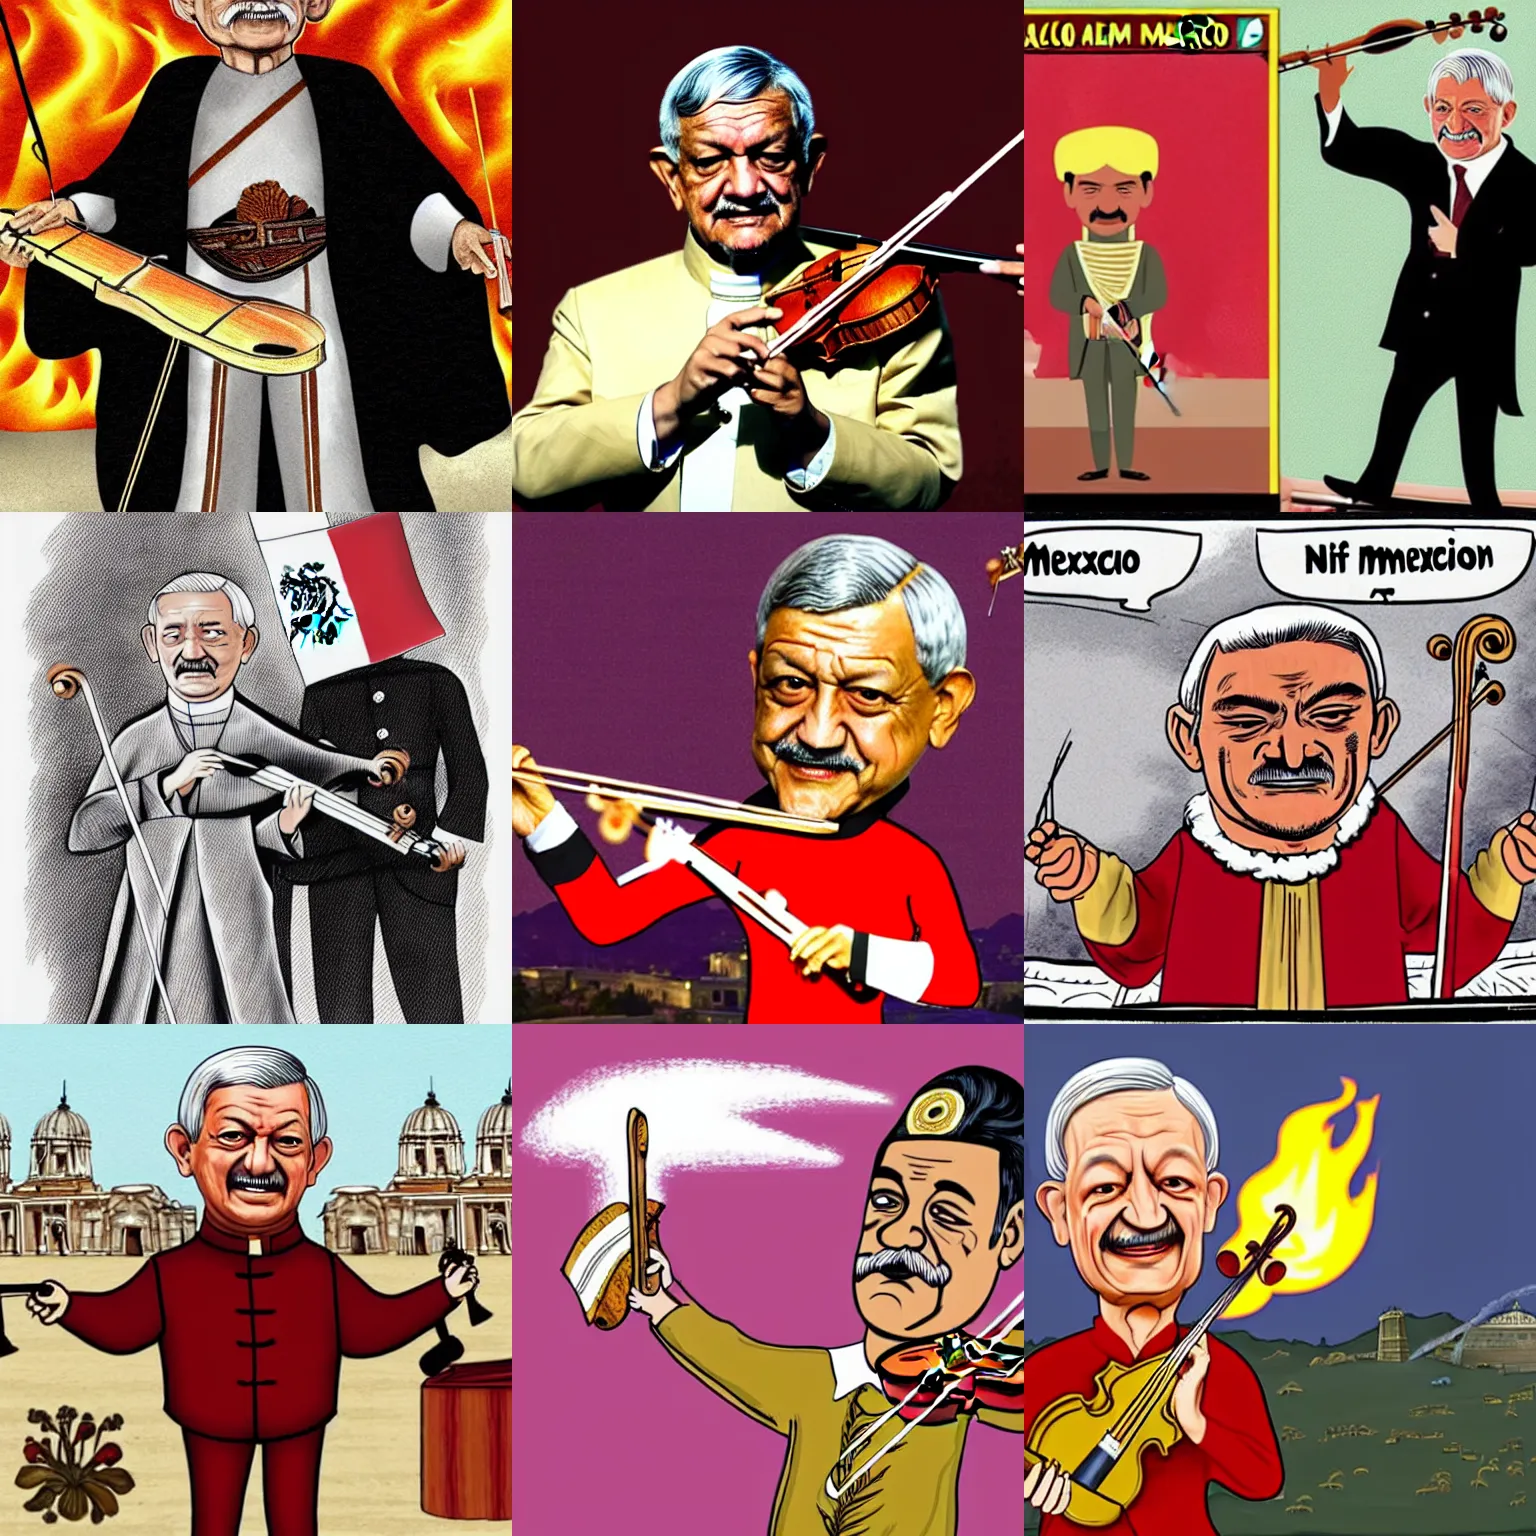 Prompt: a cartoon amlo dressed as a roman emperor, playing the violin as mexico burns in the background